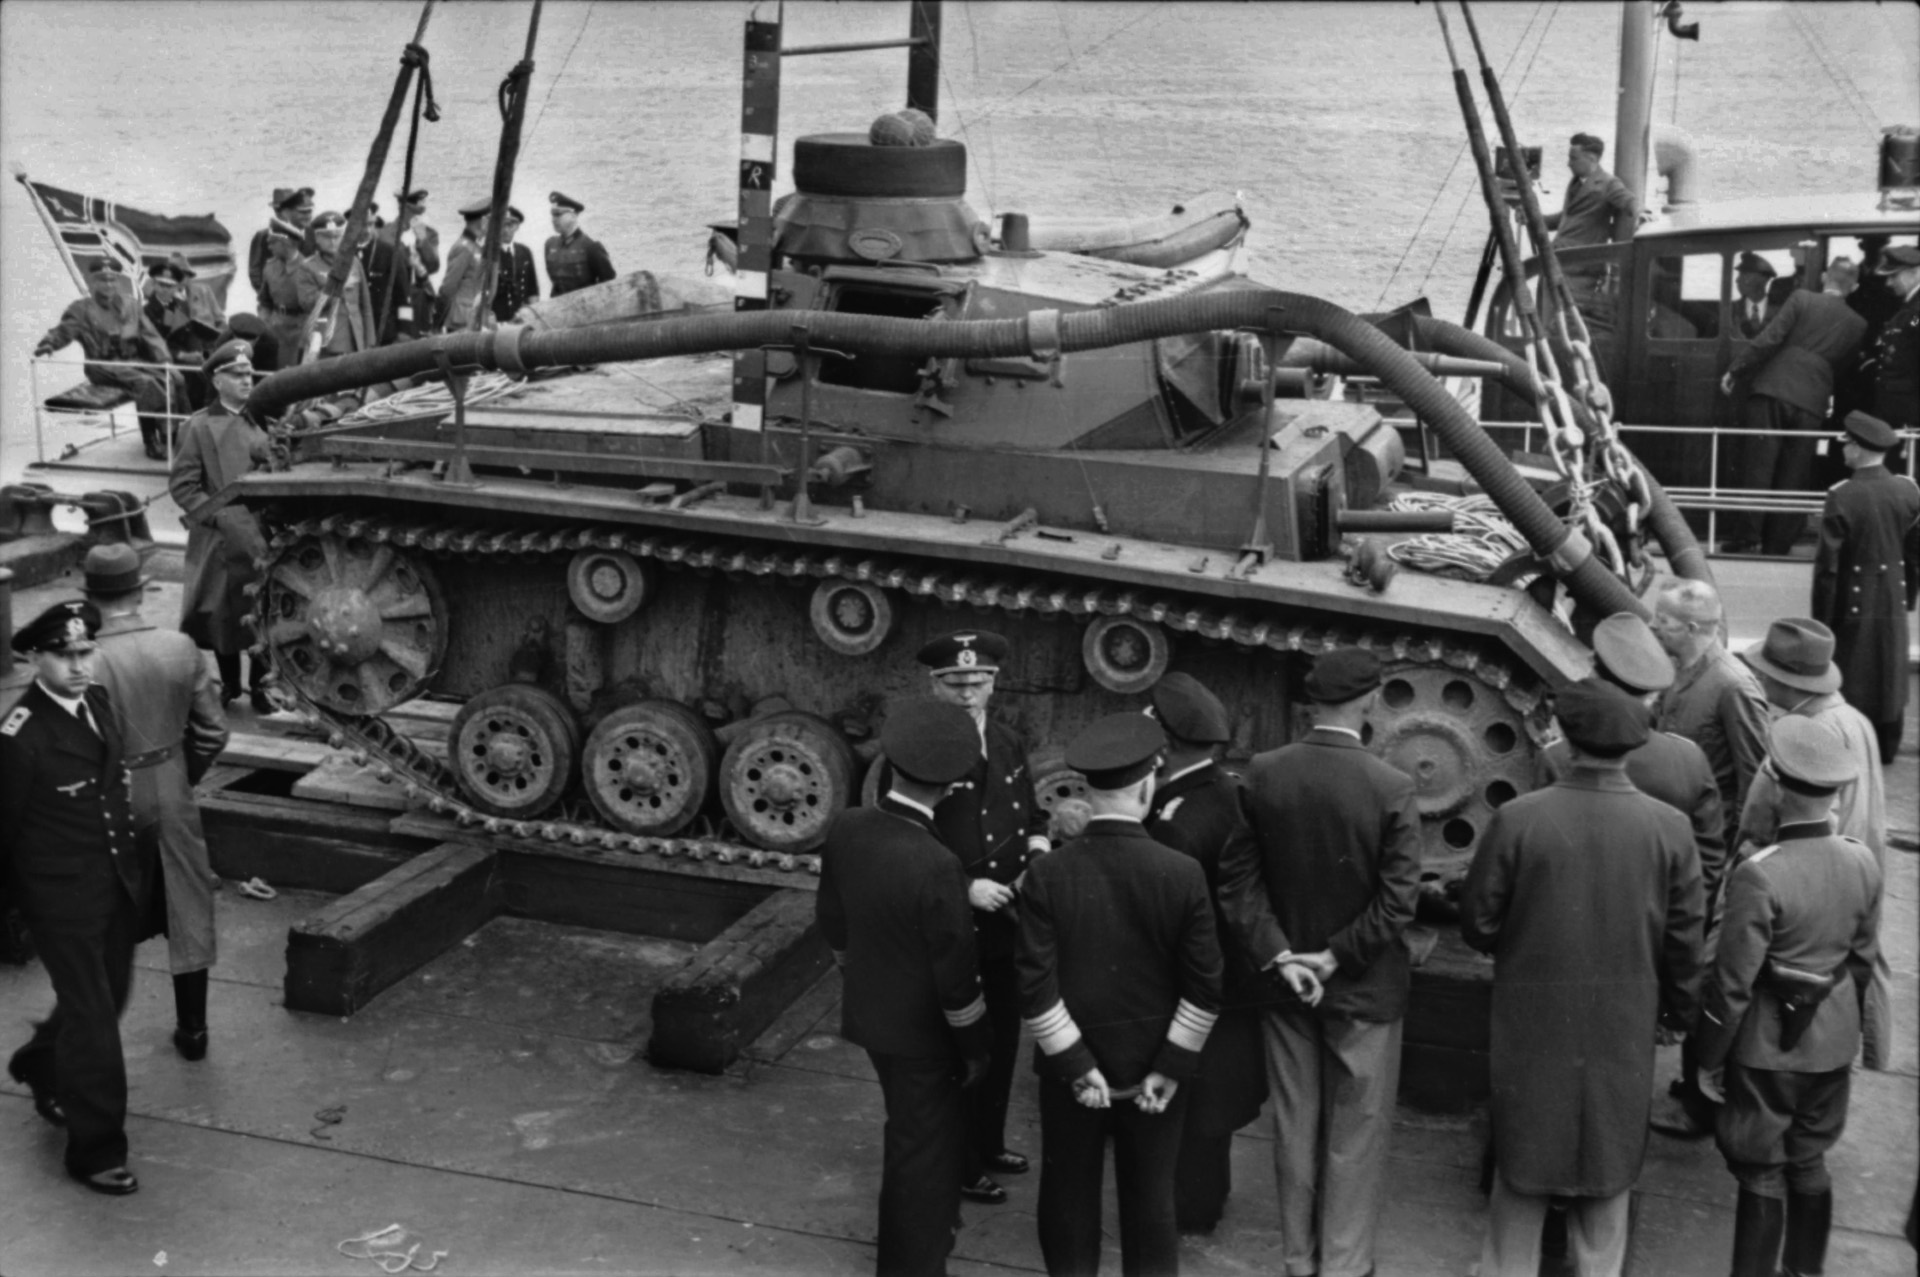 For Operation Sea Lion, the Germans experimented with submersible Pz Kpfw III tanks (Tauchpanzer) designed to be launched from a vessel and stay underwater for 20 minutes, rather than “swim” as the Allies’ DD tanks did on D-Day.